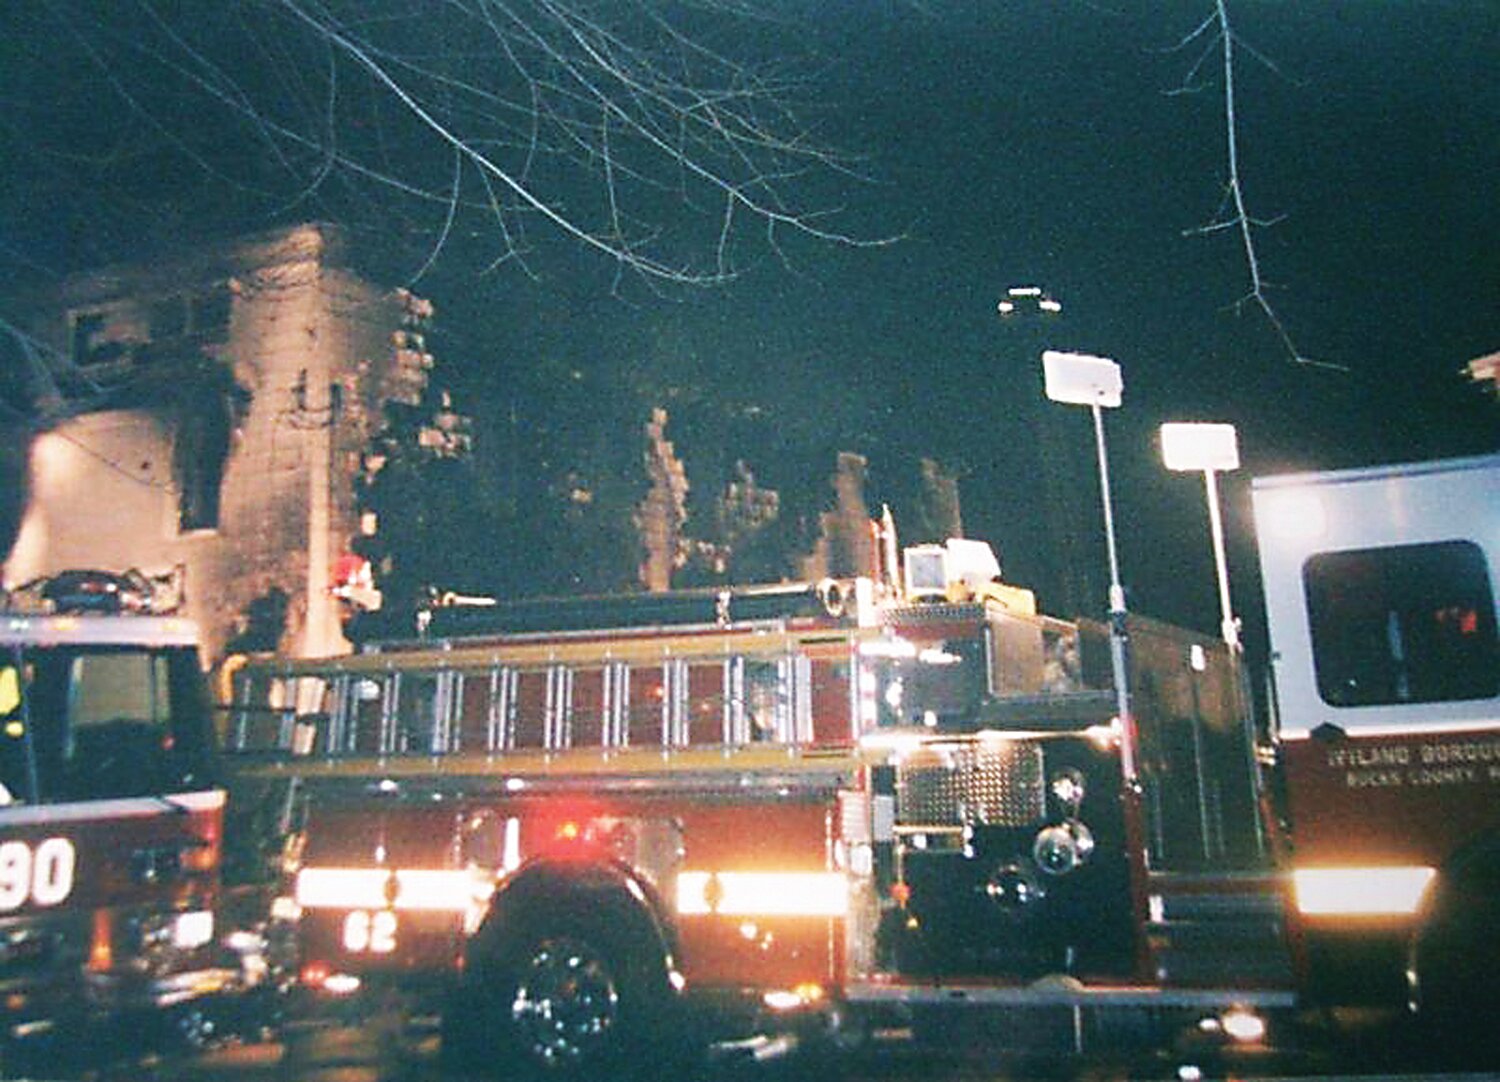 Seventy firefighters from five companies responded to a devastating fire at the borough hall on Jan. 5, 1998. Heat from the blaze even melted plastic on one of the fire truck’s lights.